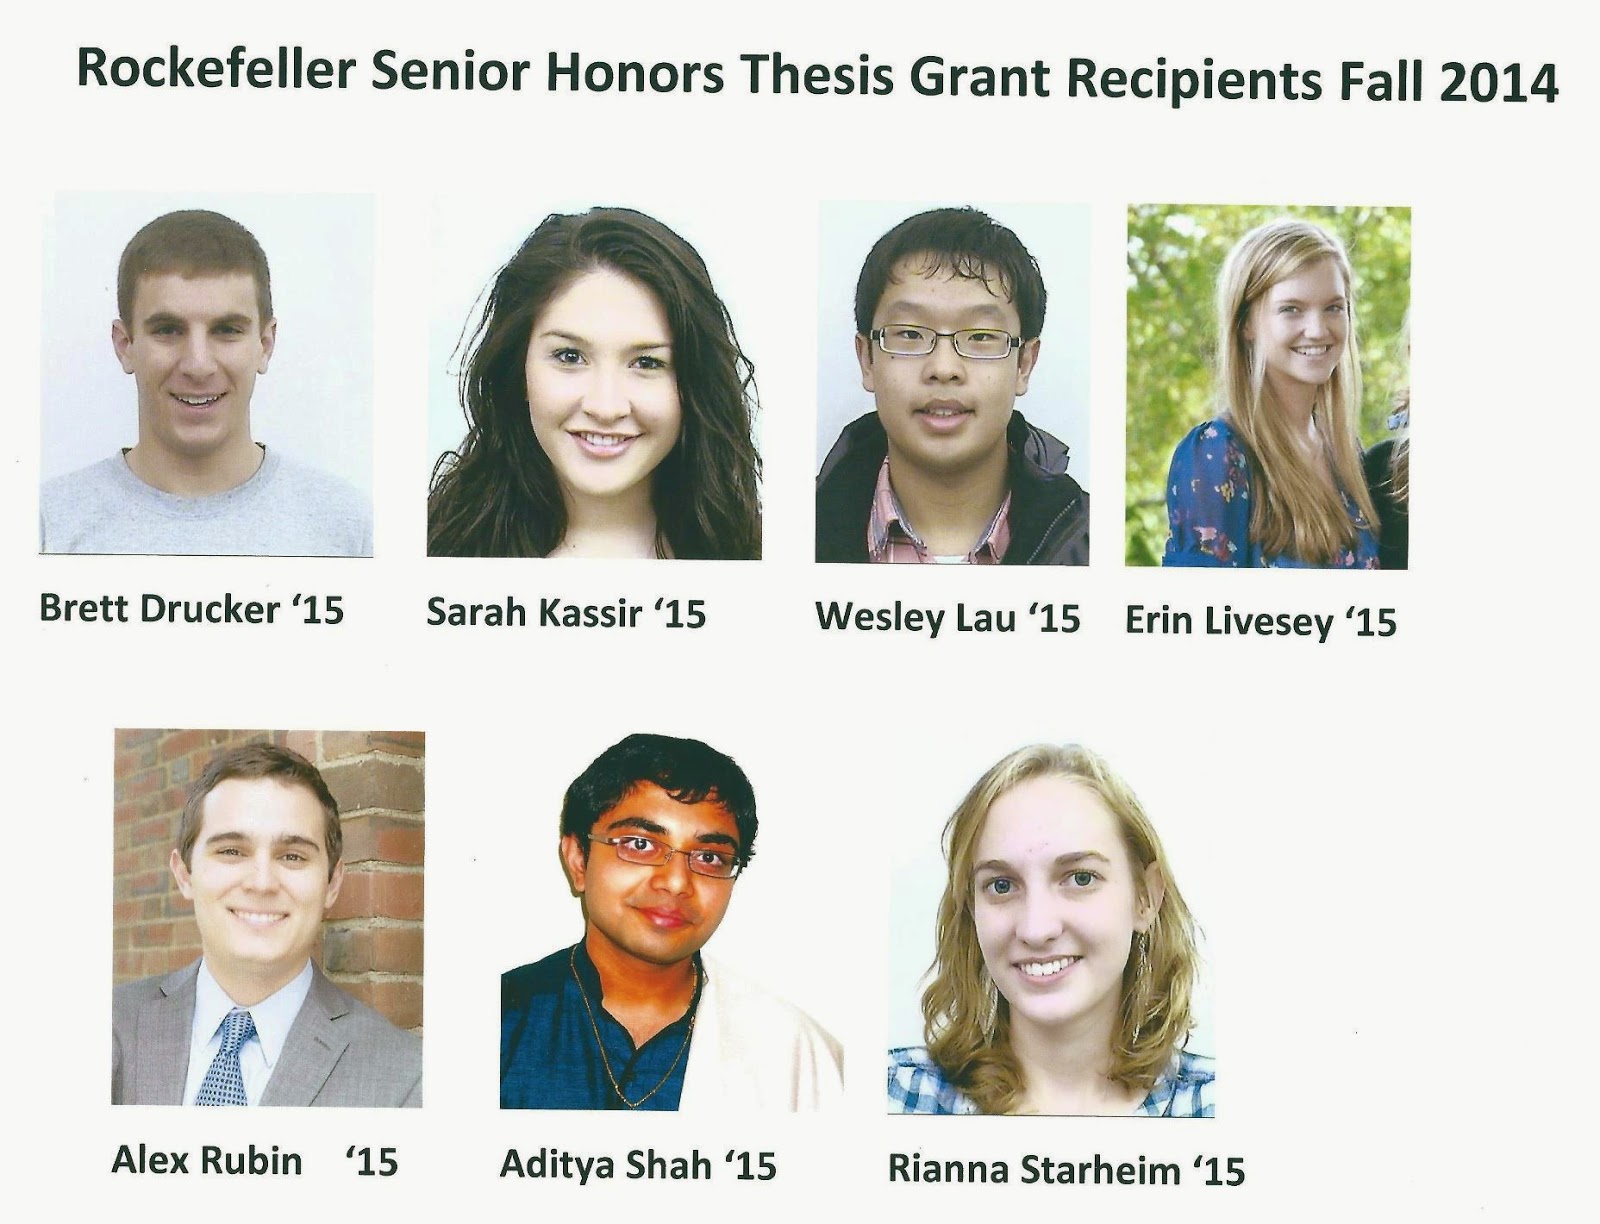 Honors thesis research grant